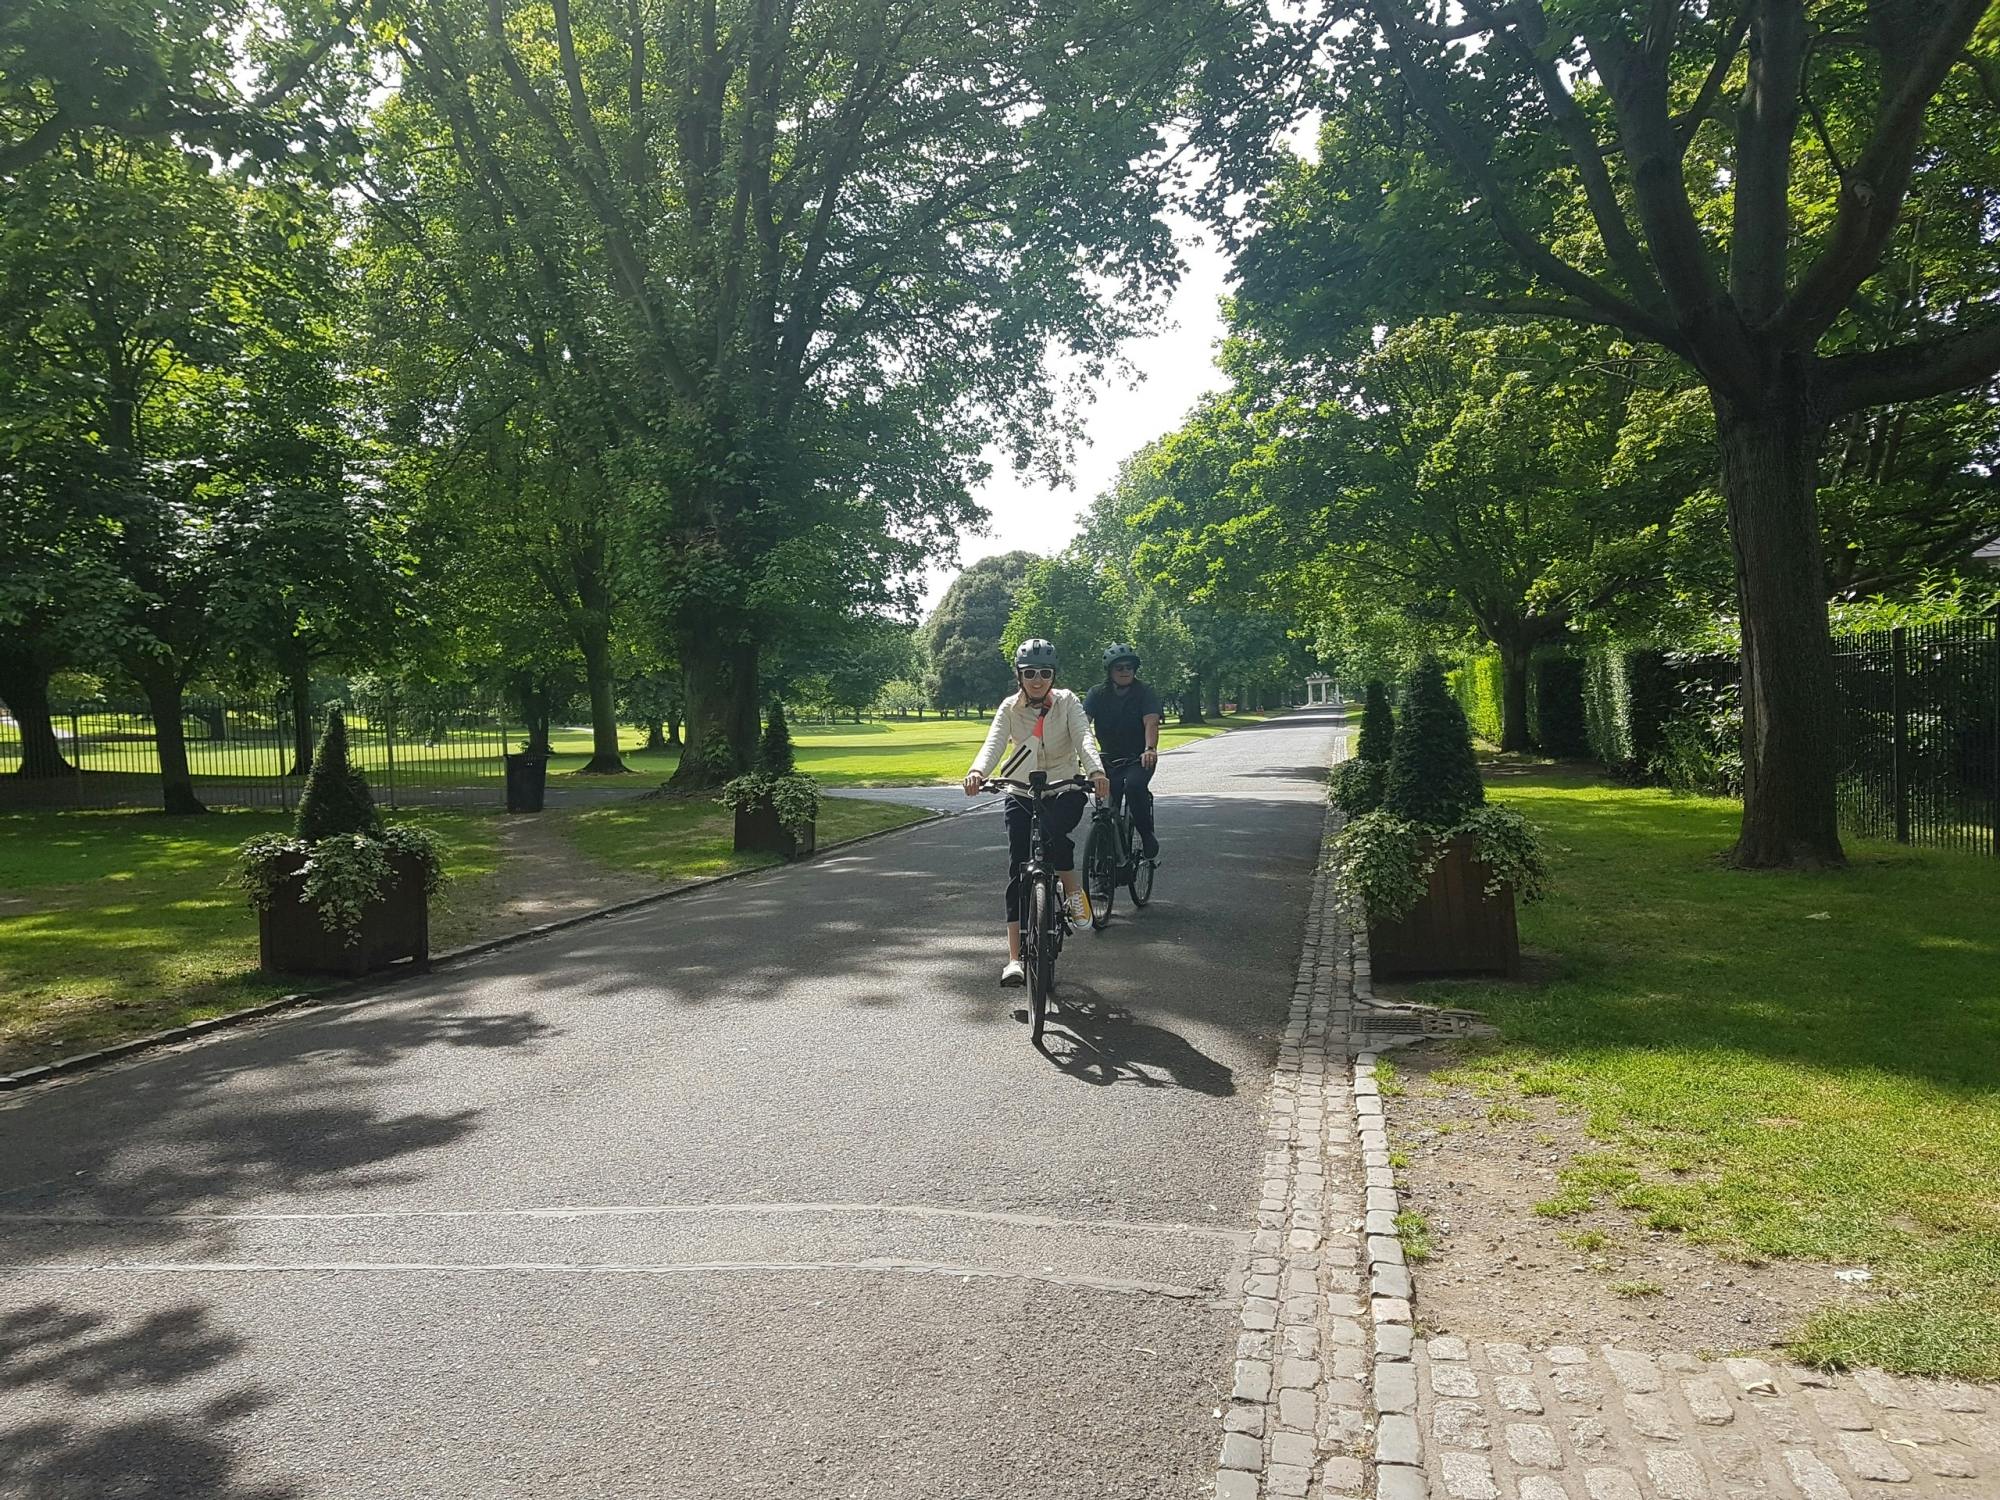 Stories and sites of Dublin guided bike tour